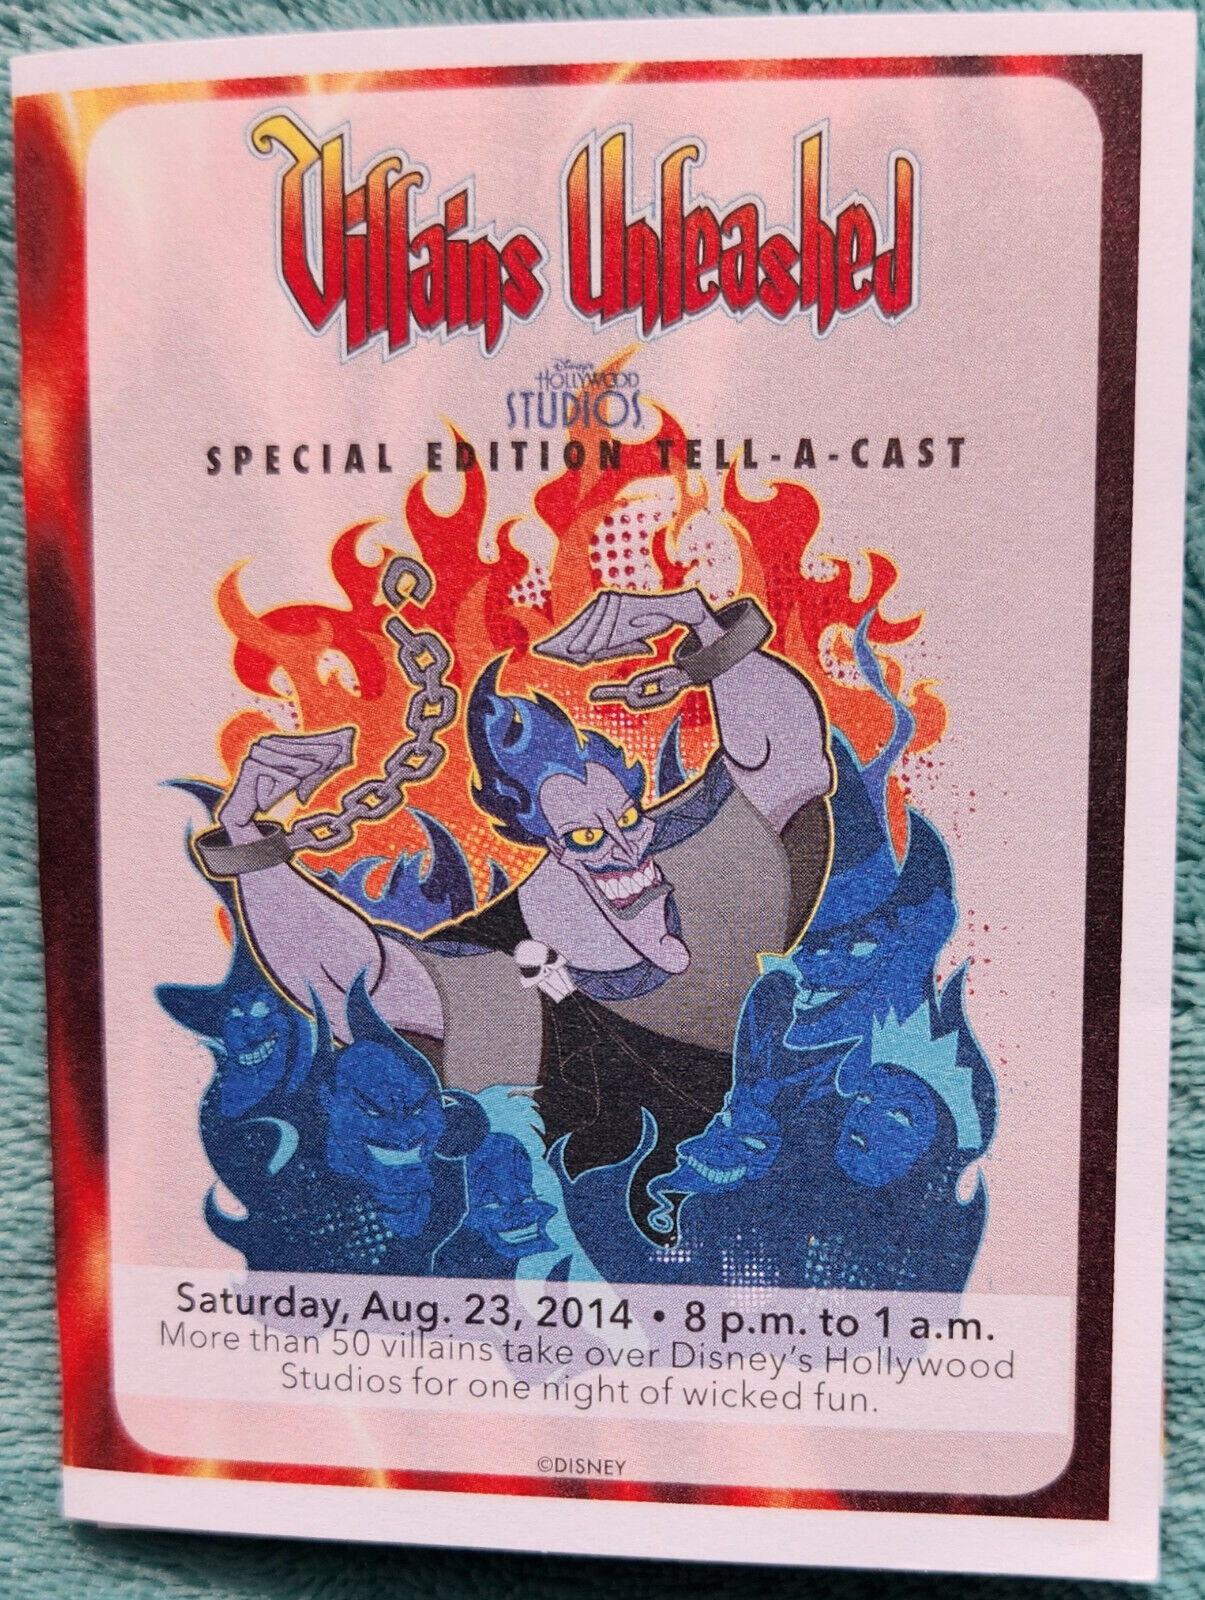 2014 Hollywood Studios Villains Unleashed 1st Ever After Hours Event Tell-A-Cast